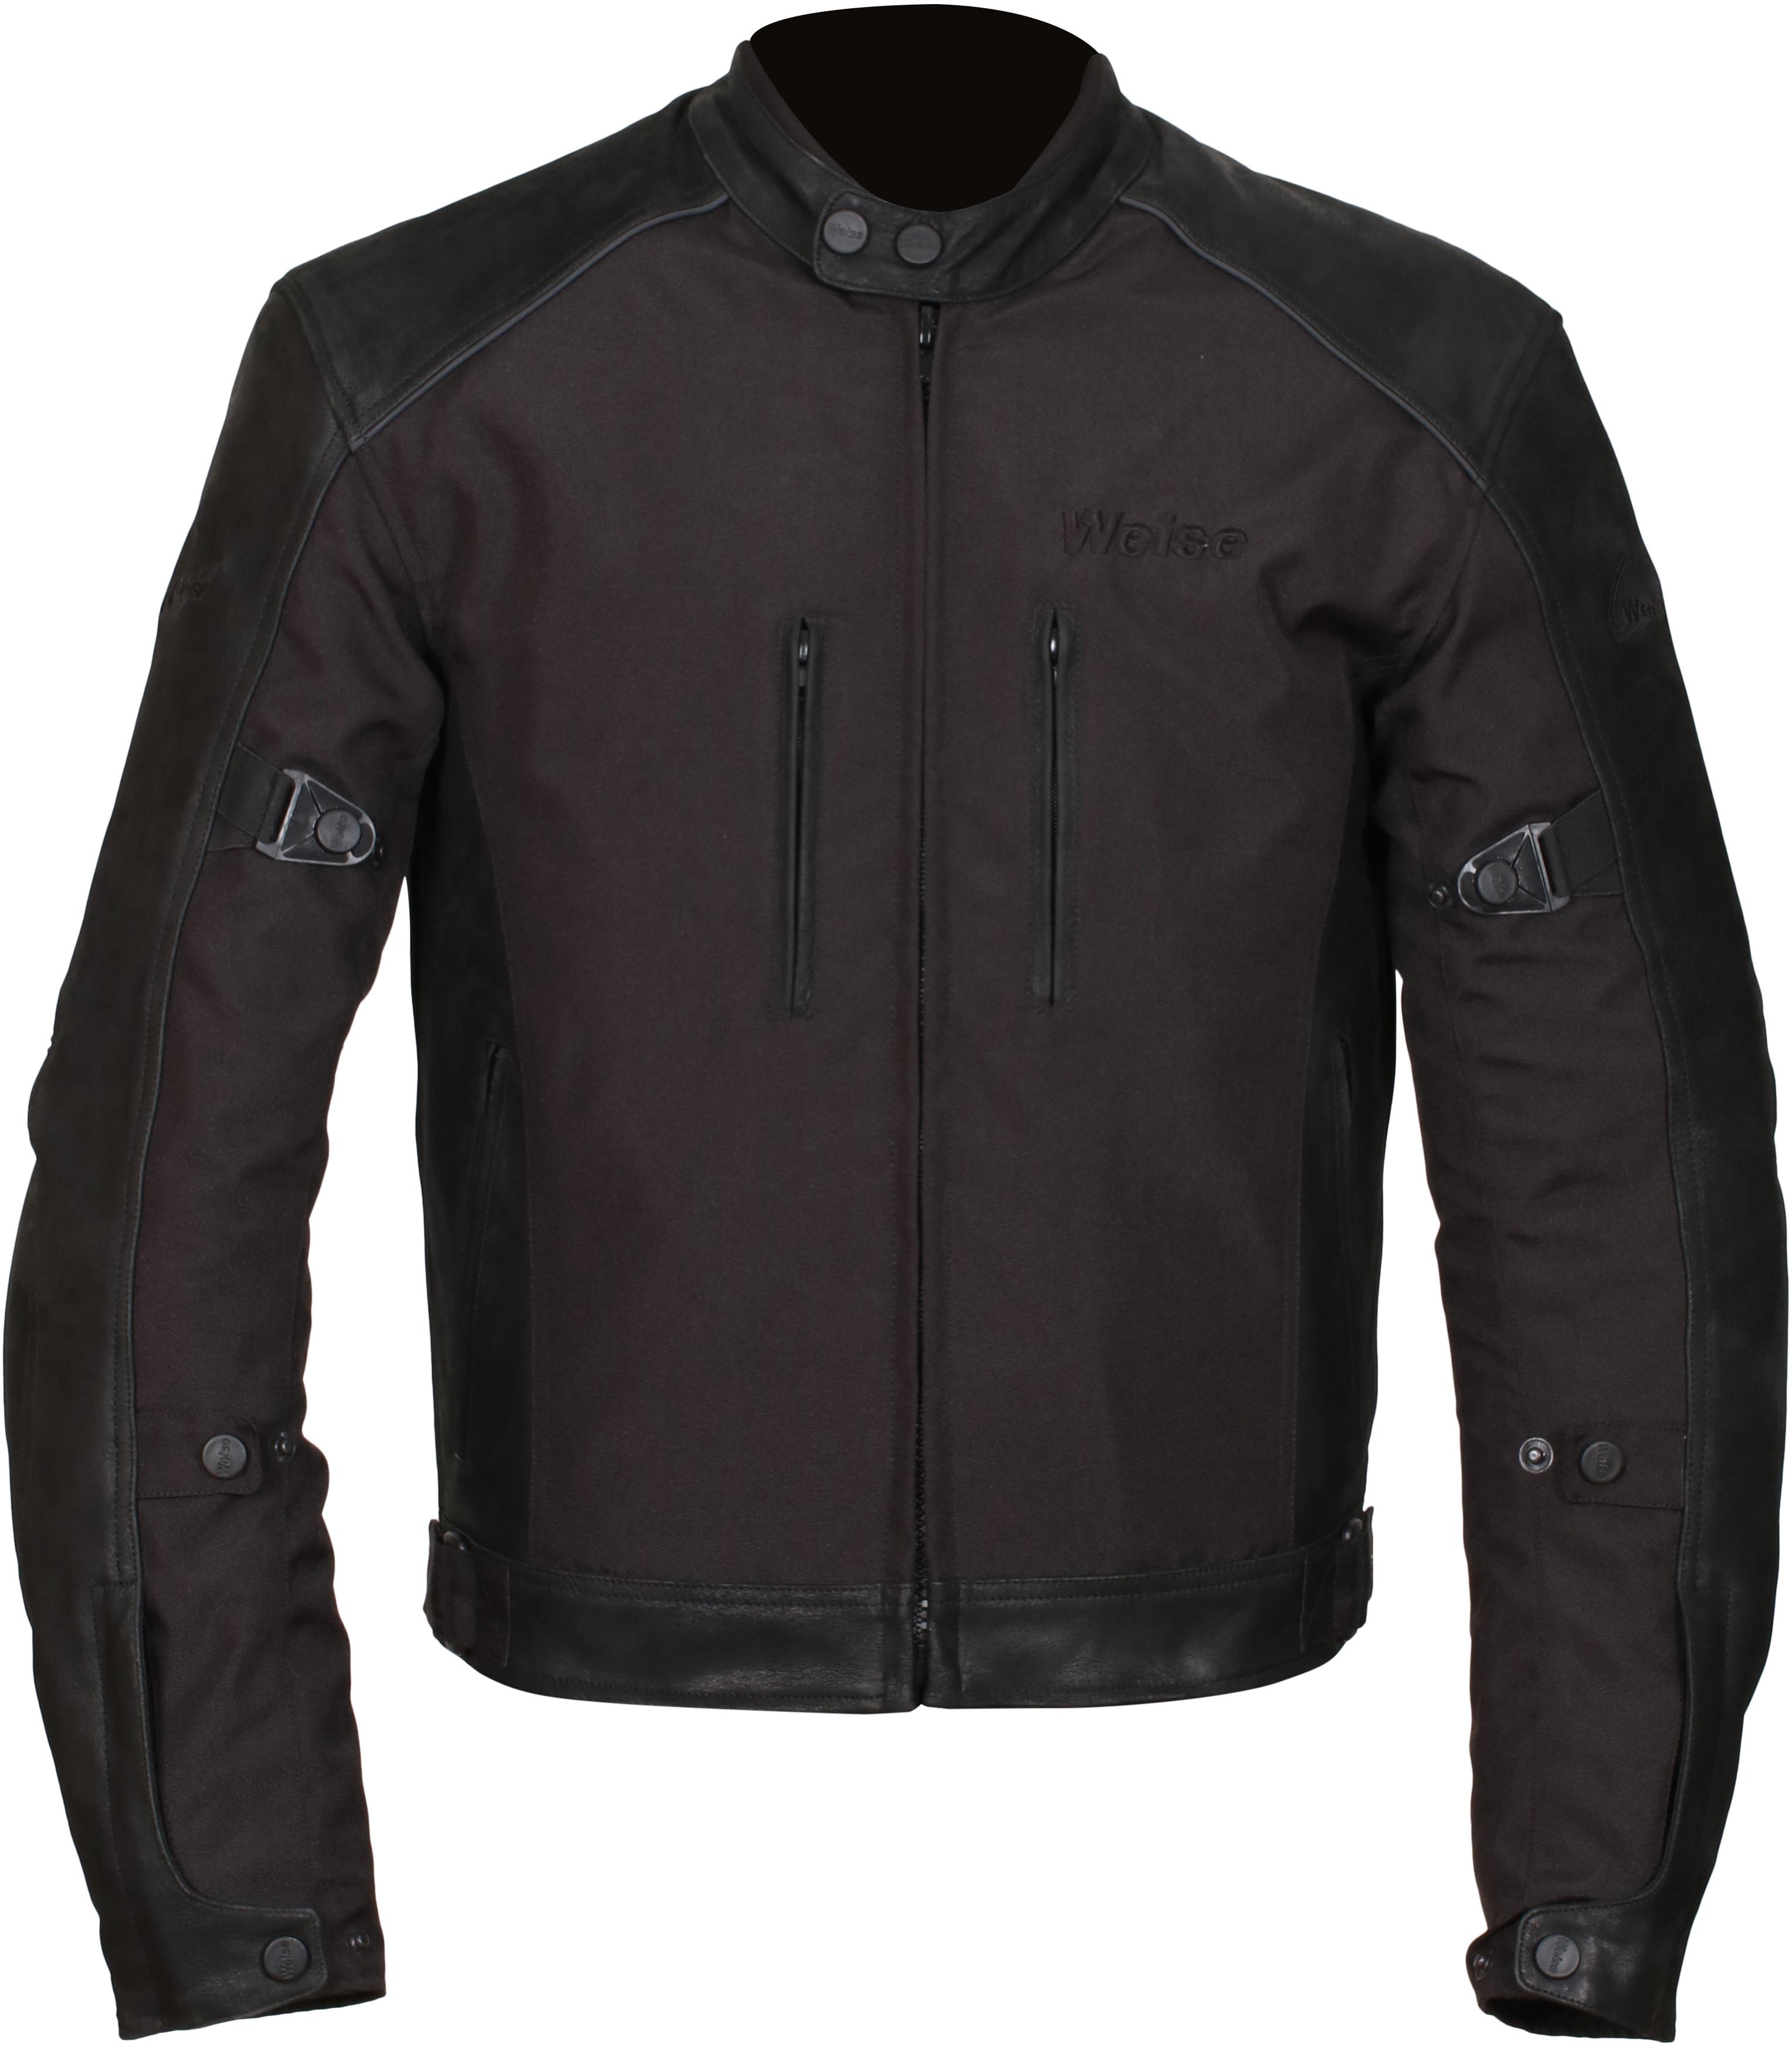 Weise Mission Motorcycle Jacket - Black, 3Xl